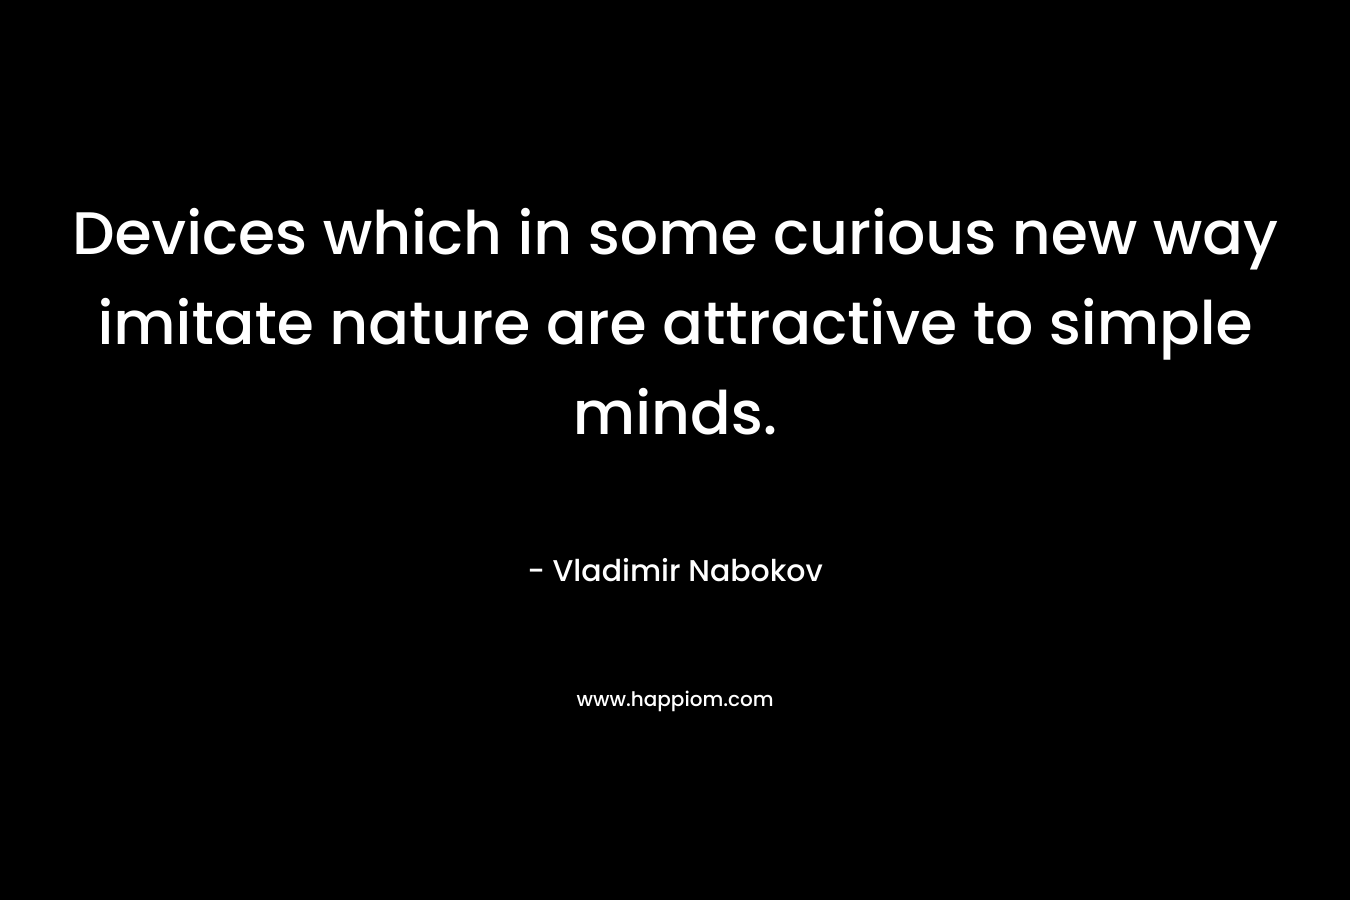 Devices which in some curious new way imitate nature are attractive to simple minds. – Vladimir Nabokov